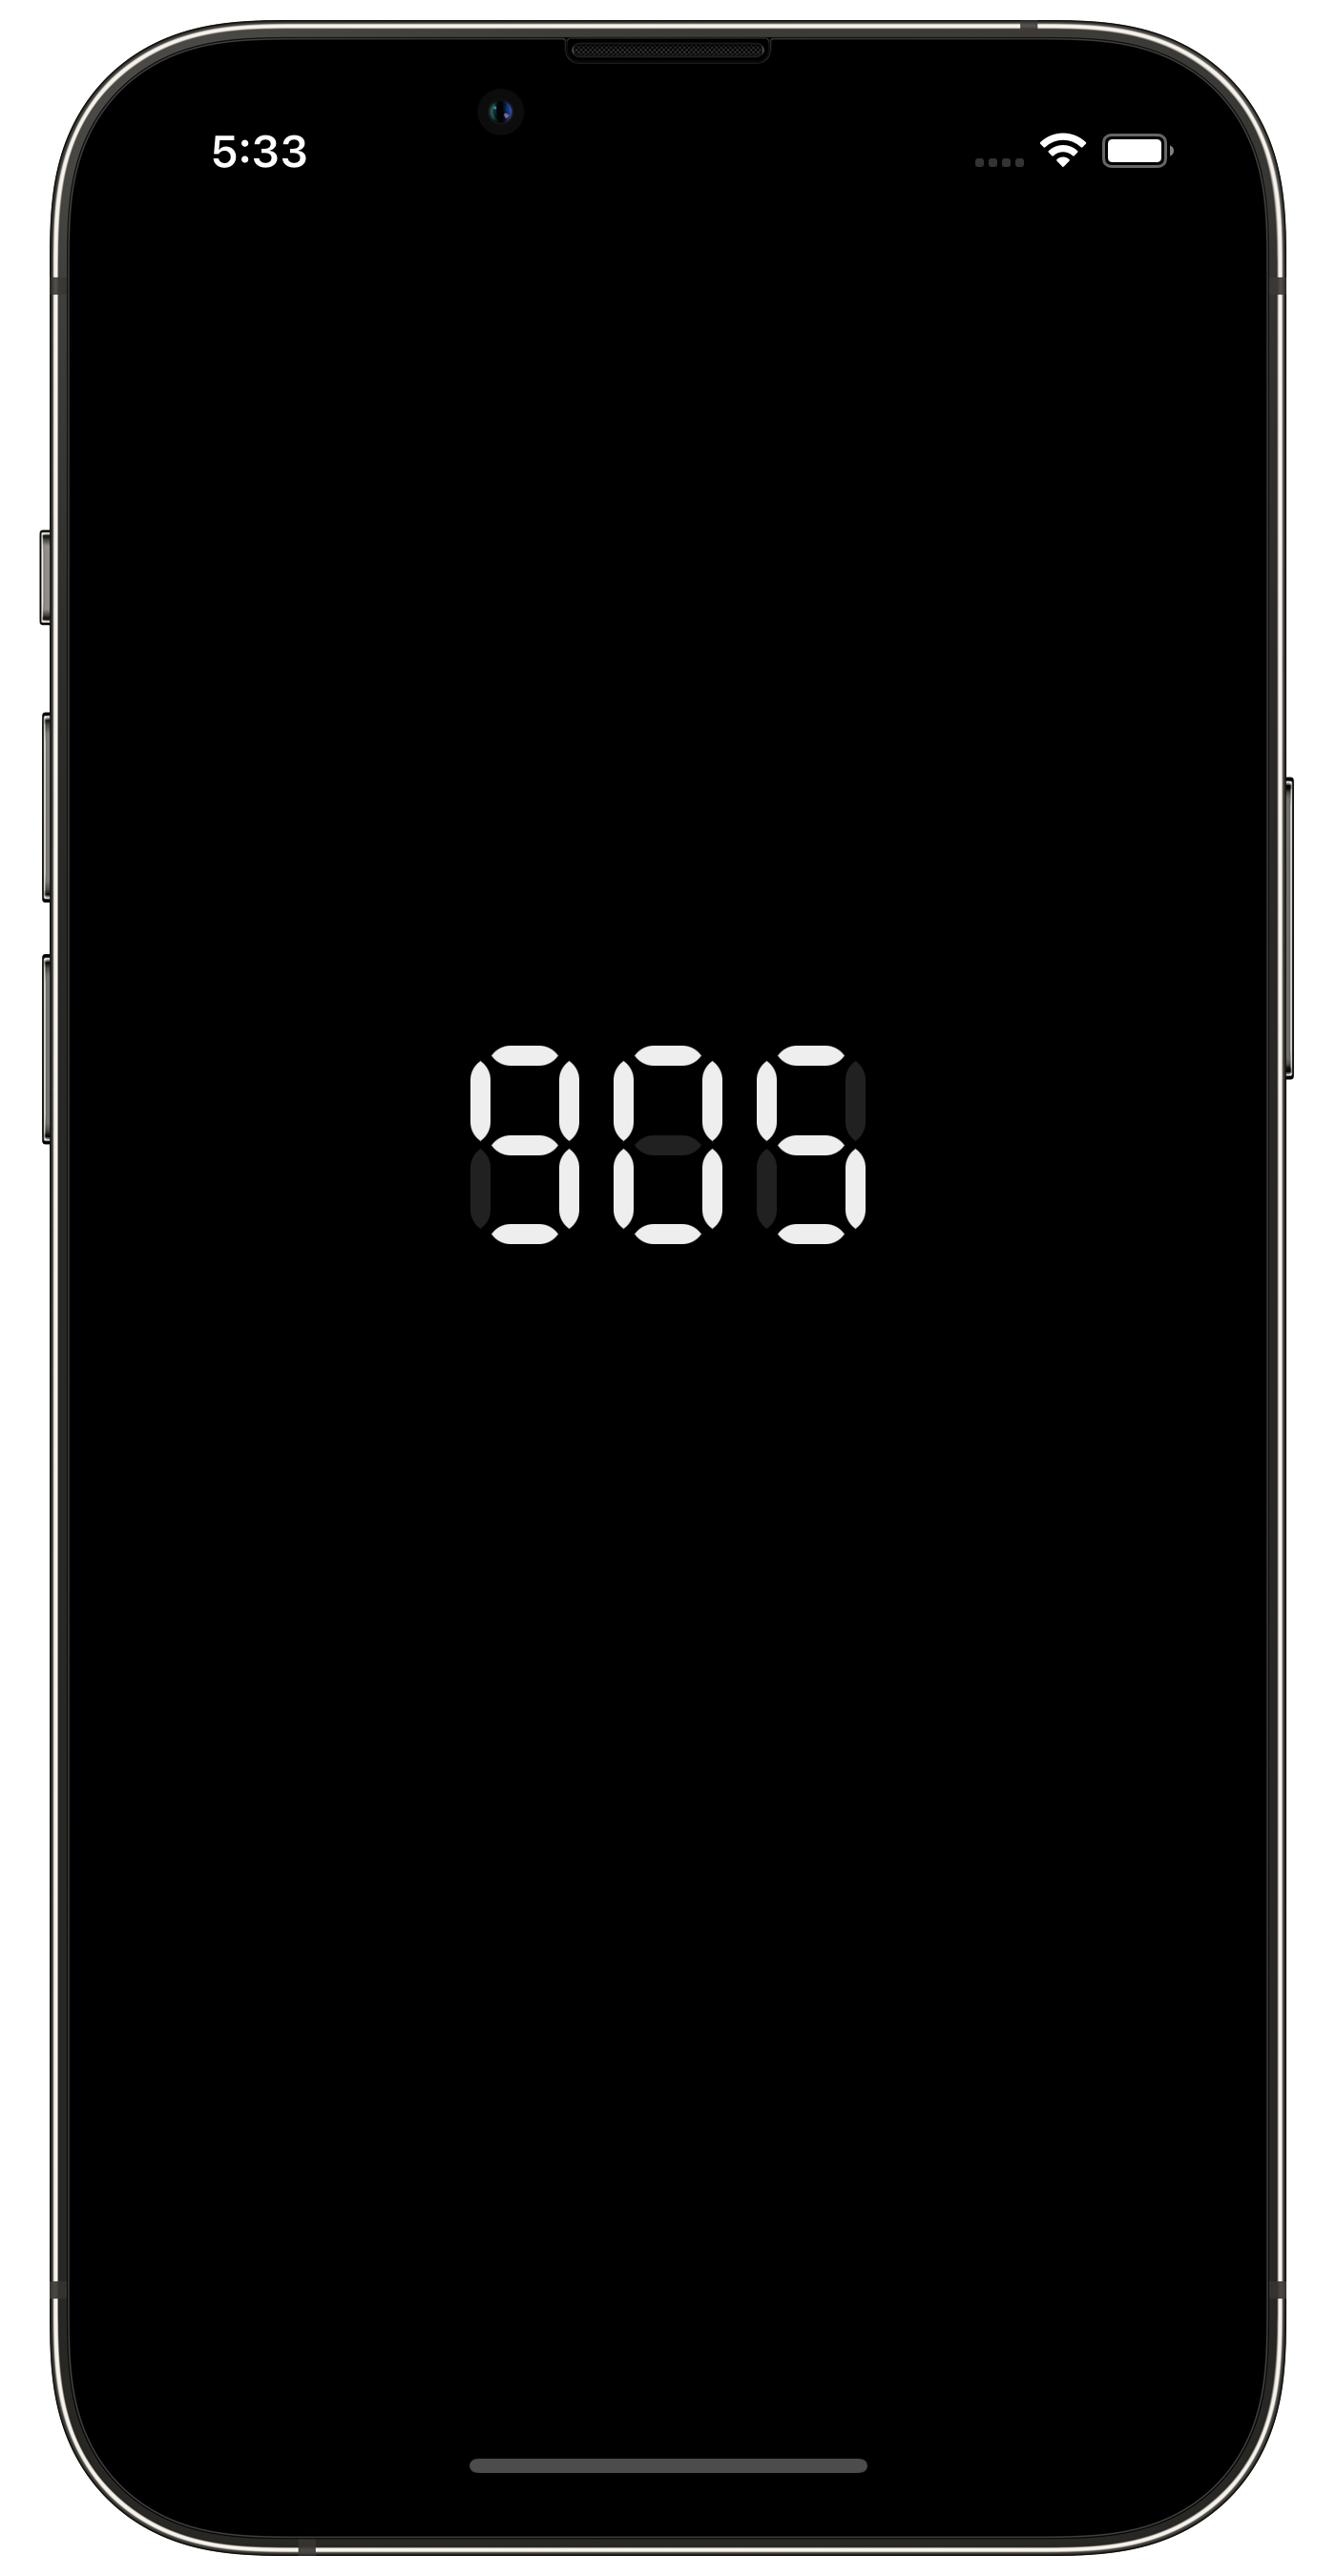 Example of the seven-segment display in dark mode on an iPhone 13 Pro.